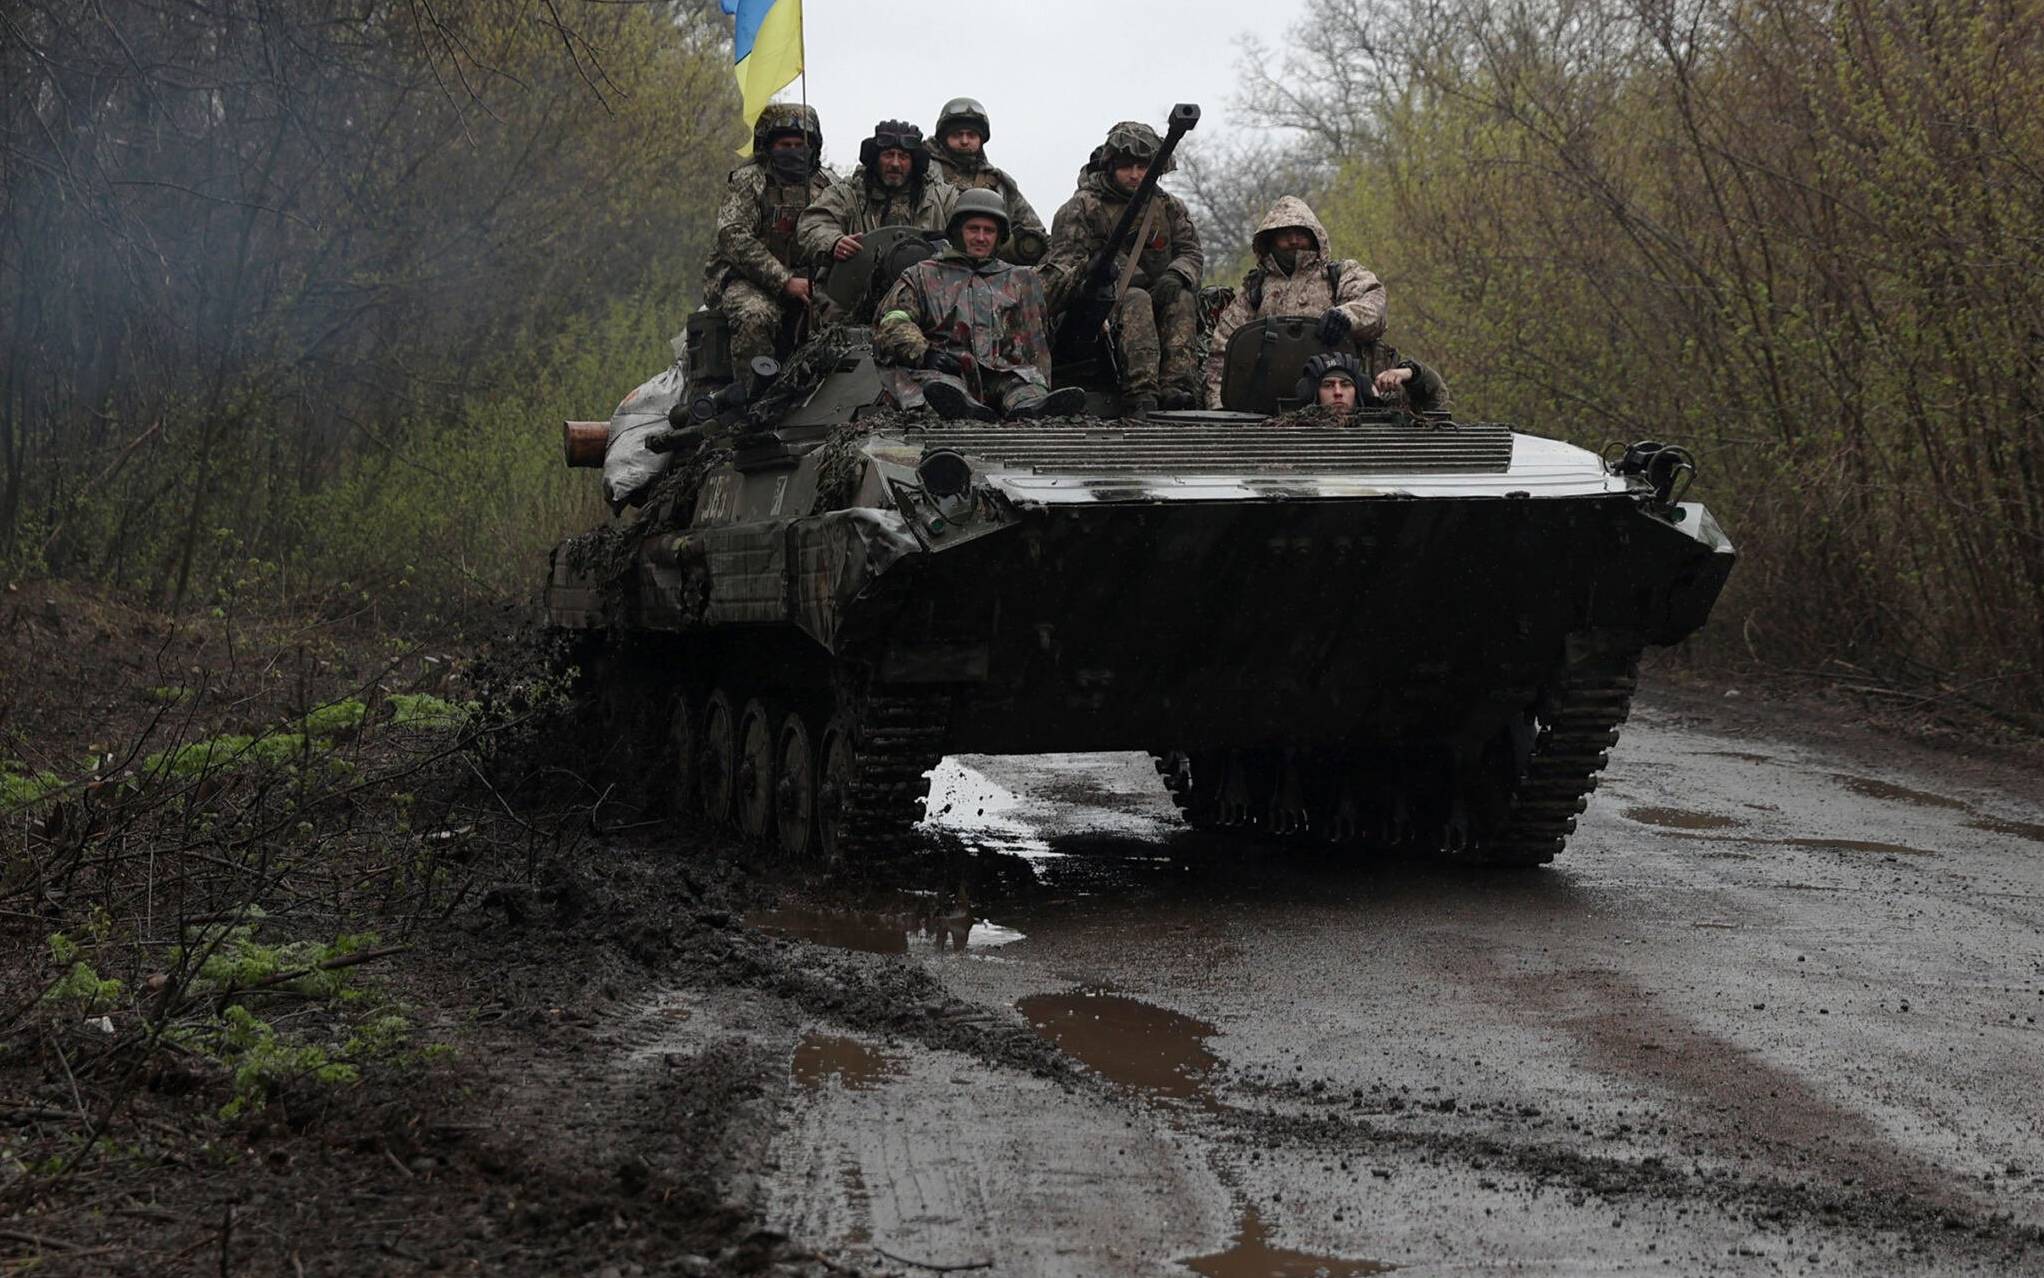 Ukrainian soldiers stand on an armoured personnel carrier (APC), not far from the front-line with Russian troops, in Izyum district, Kharkiv region on April 18, 2022, during the Russian invasion of Ukraine. (Photo by Anatolii Stepanov / AFP)